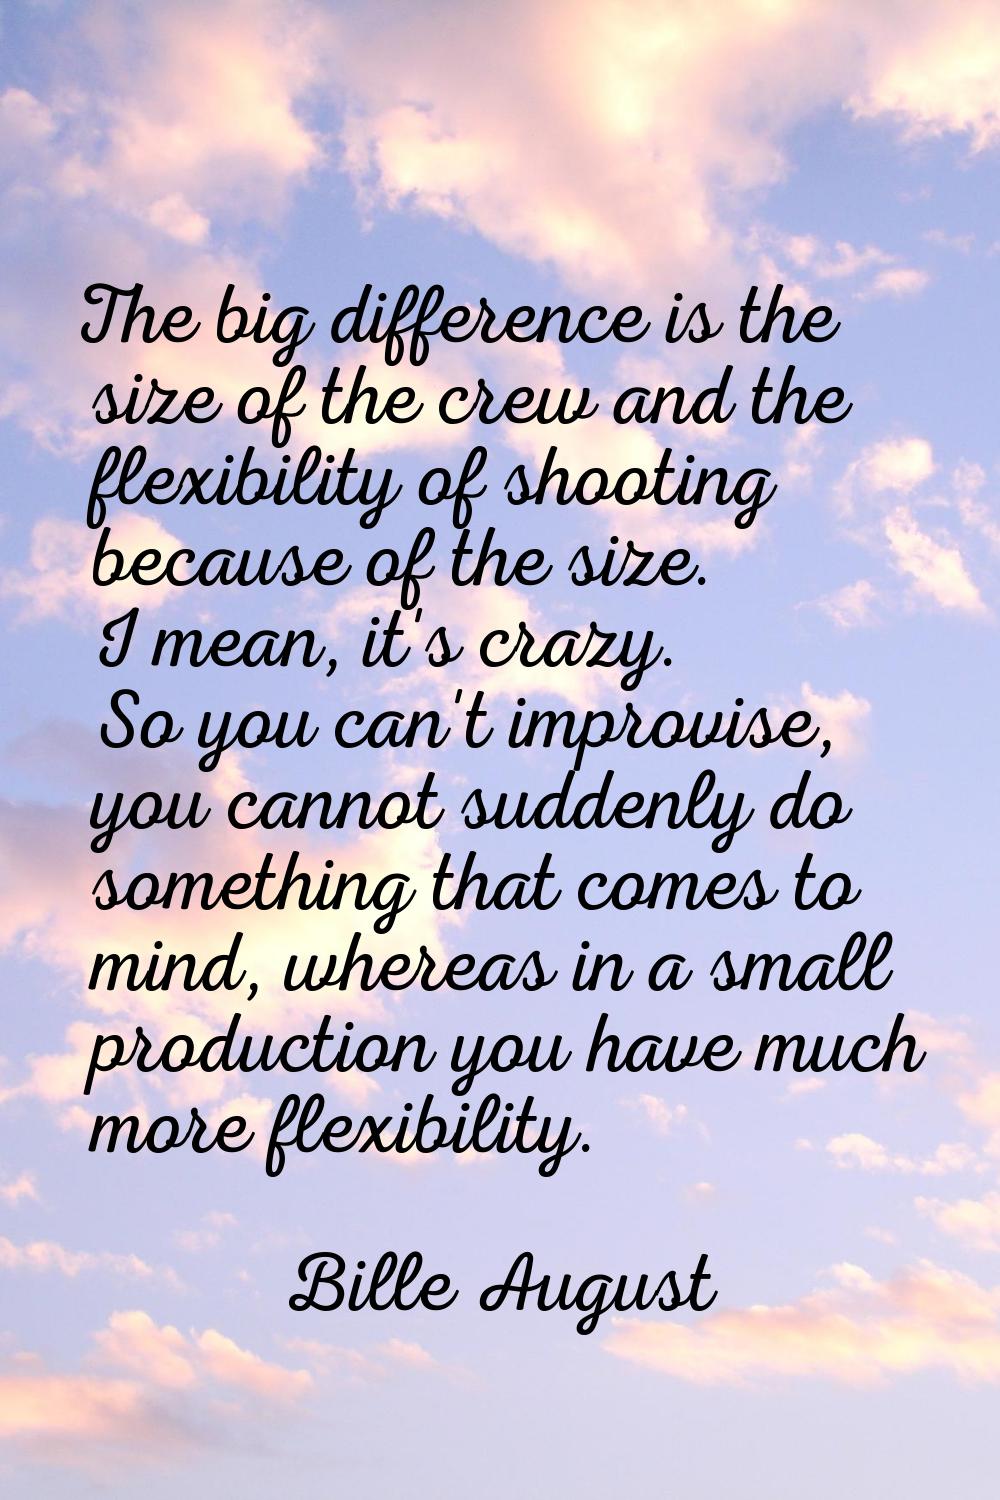 The big difference is the size of the crew and the flexibility of shooting because of the size. I m